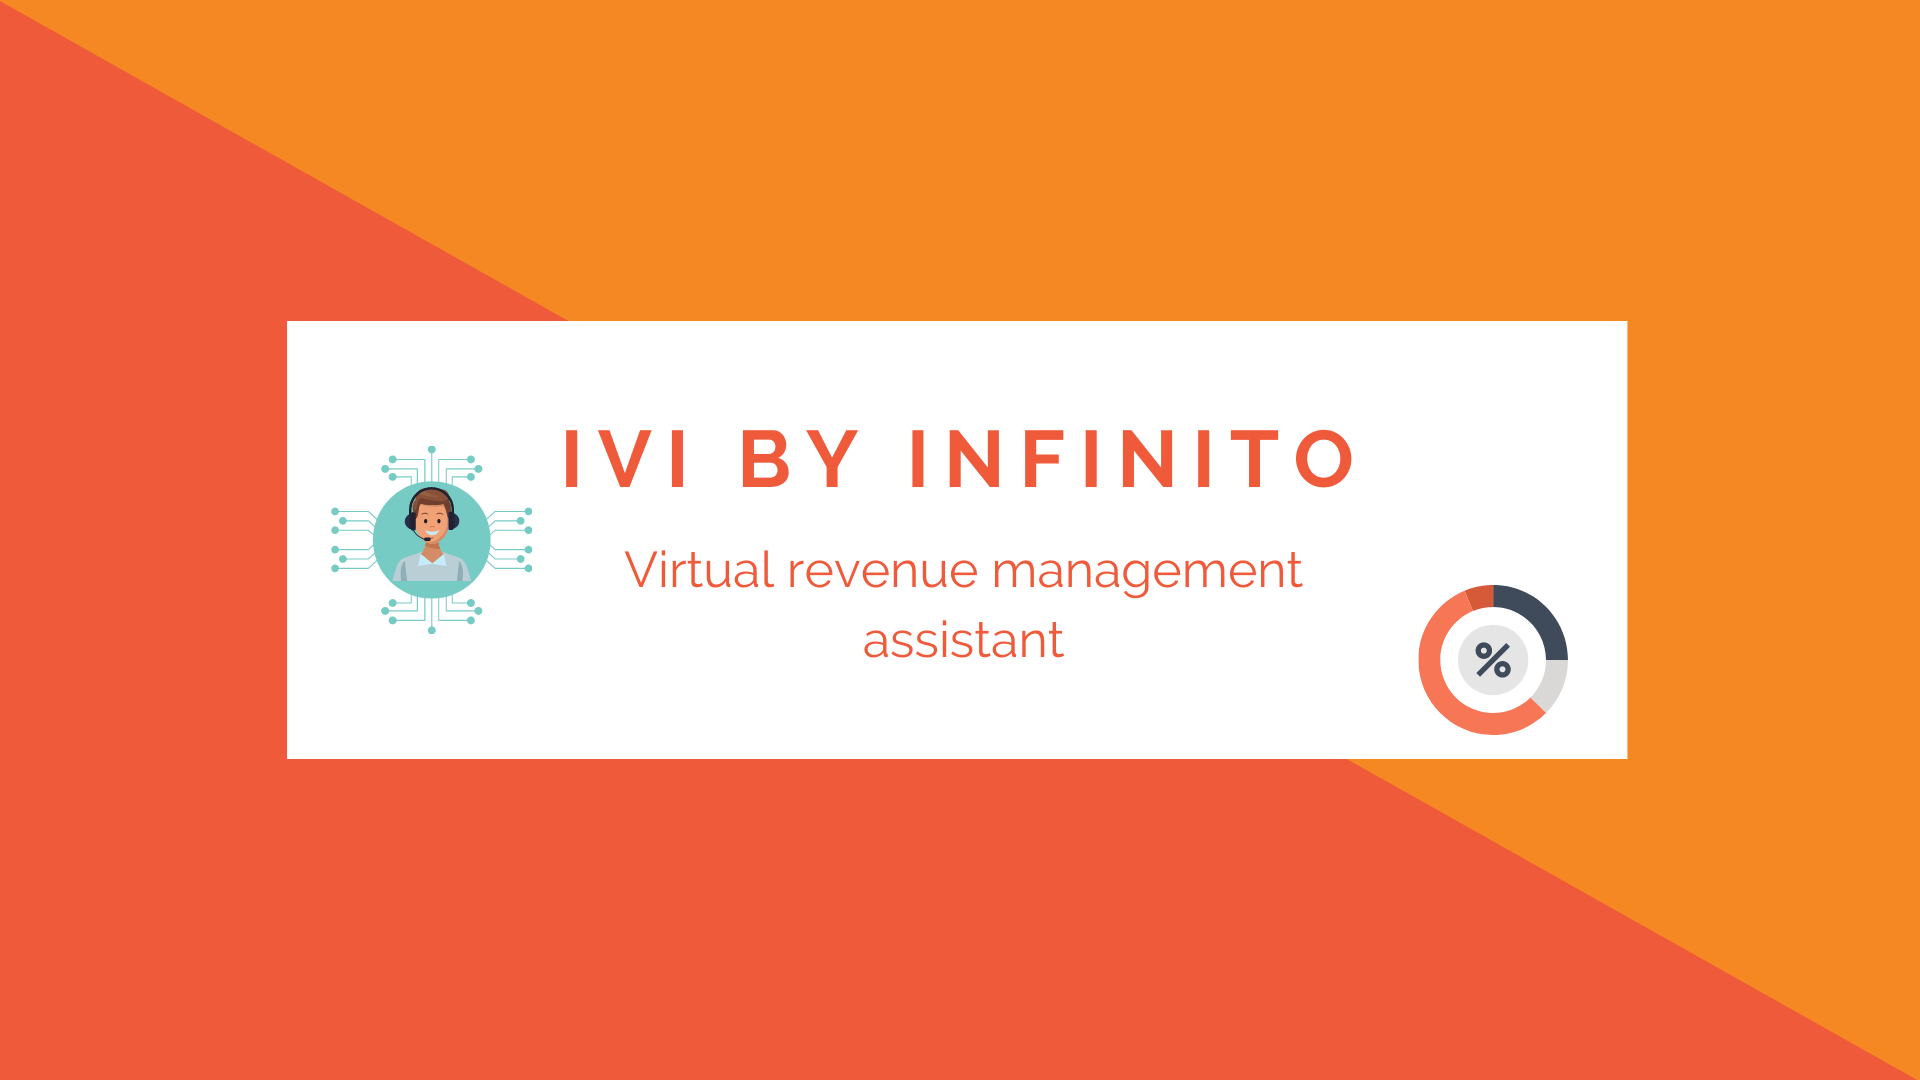 IVI by Infinito - virtual revenue management assistant for fast and better decisions